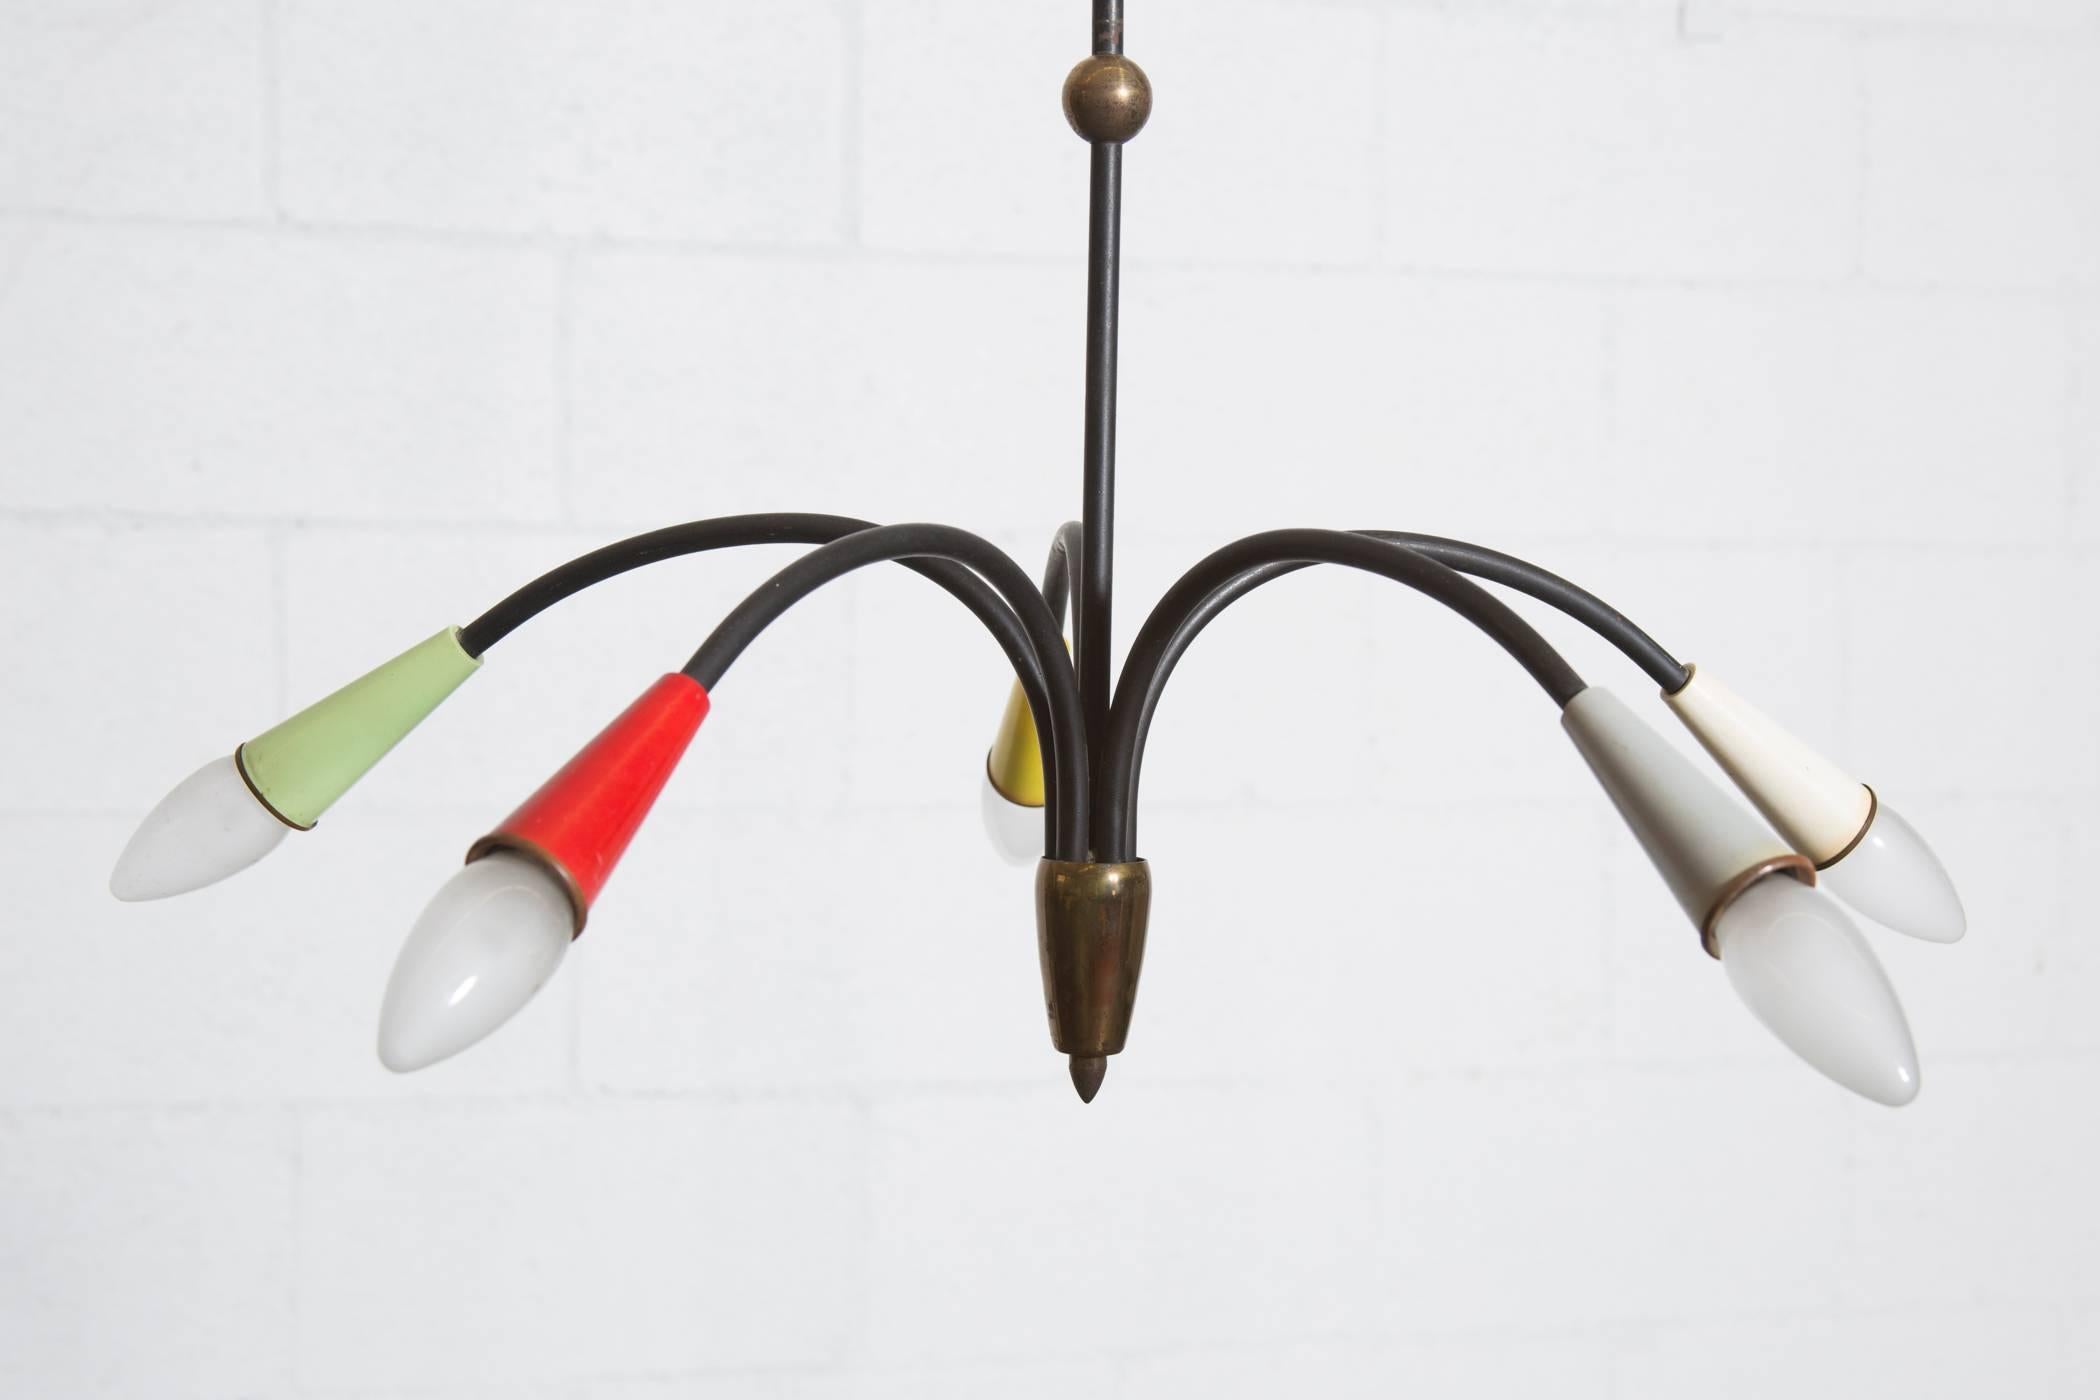 Sweet and delicate, mid century, five armed black enameled metal chandelier with brass accents and multi-colored socket casings. Original condition with some wear consistent with its age. Shown with original European candelabra bulbs. Will provide